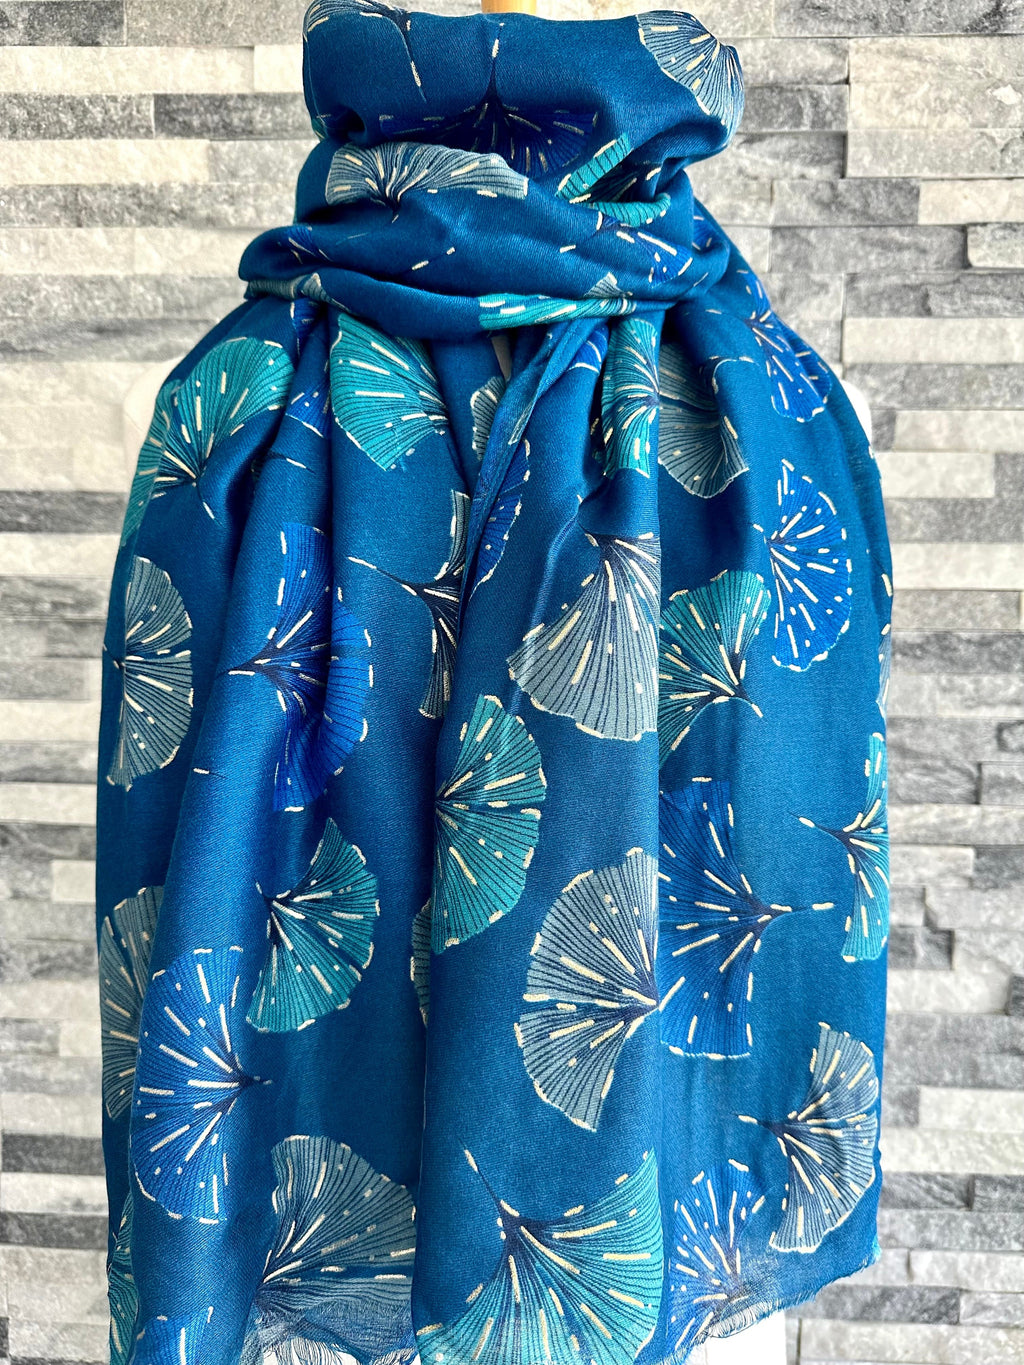 lusciousscarves Teal Blue and Gold Metallic Ginkgo Leaves Scarf.